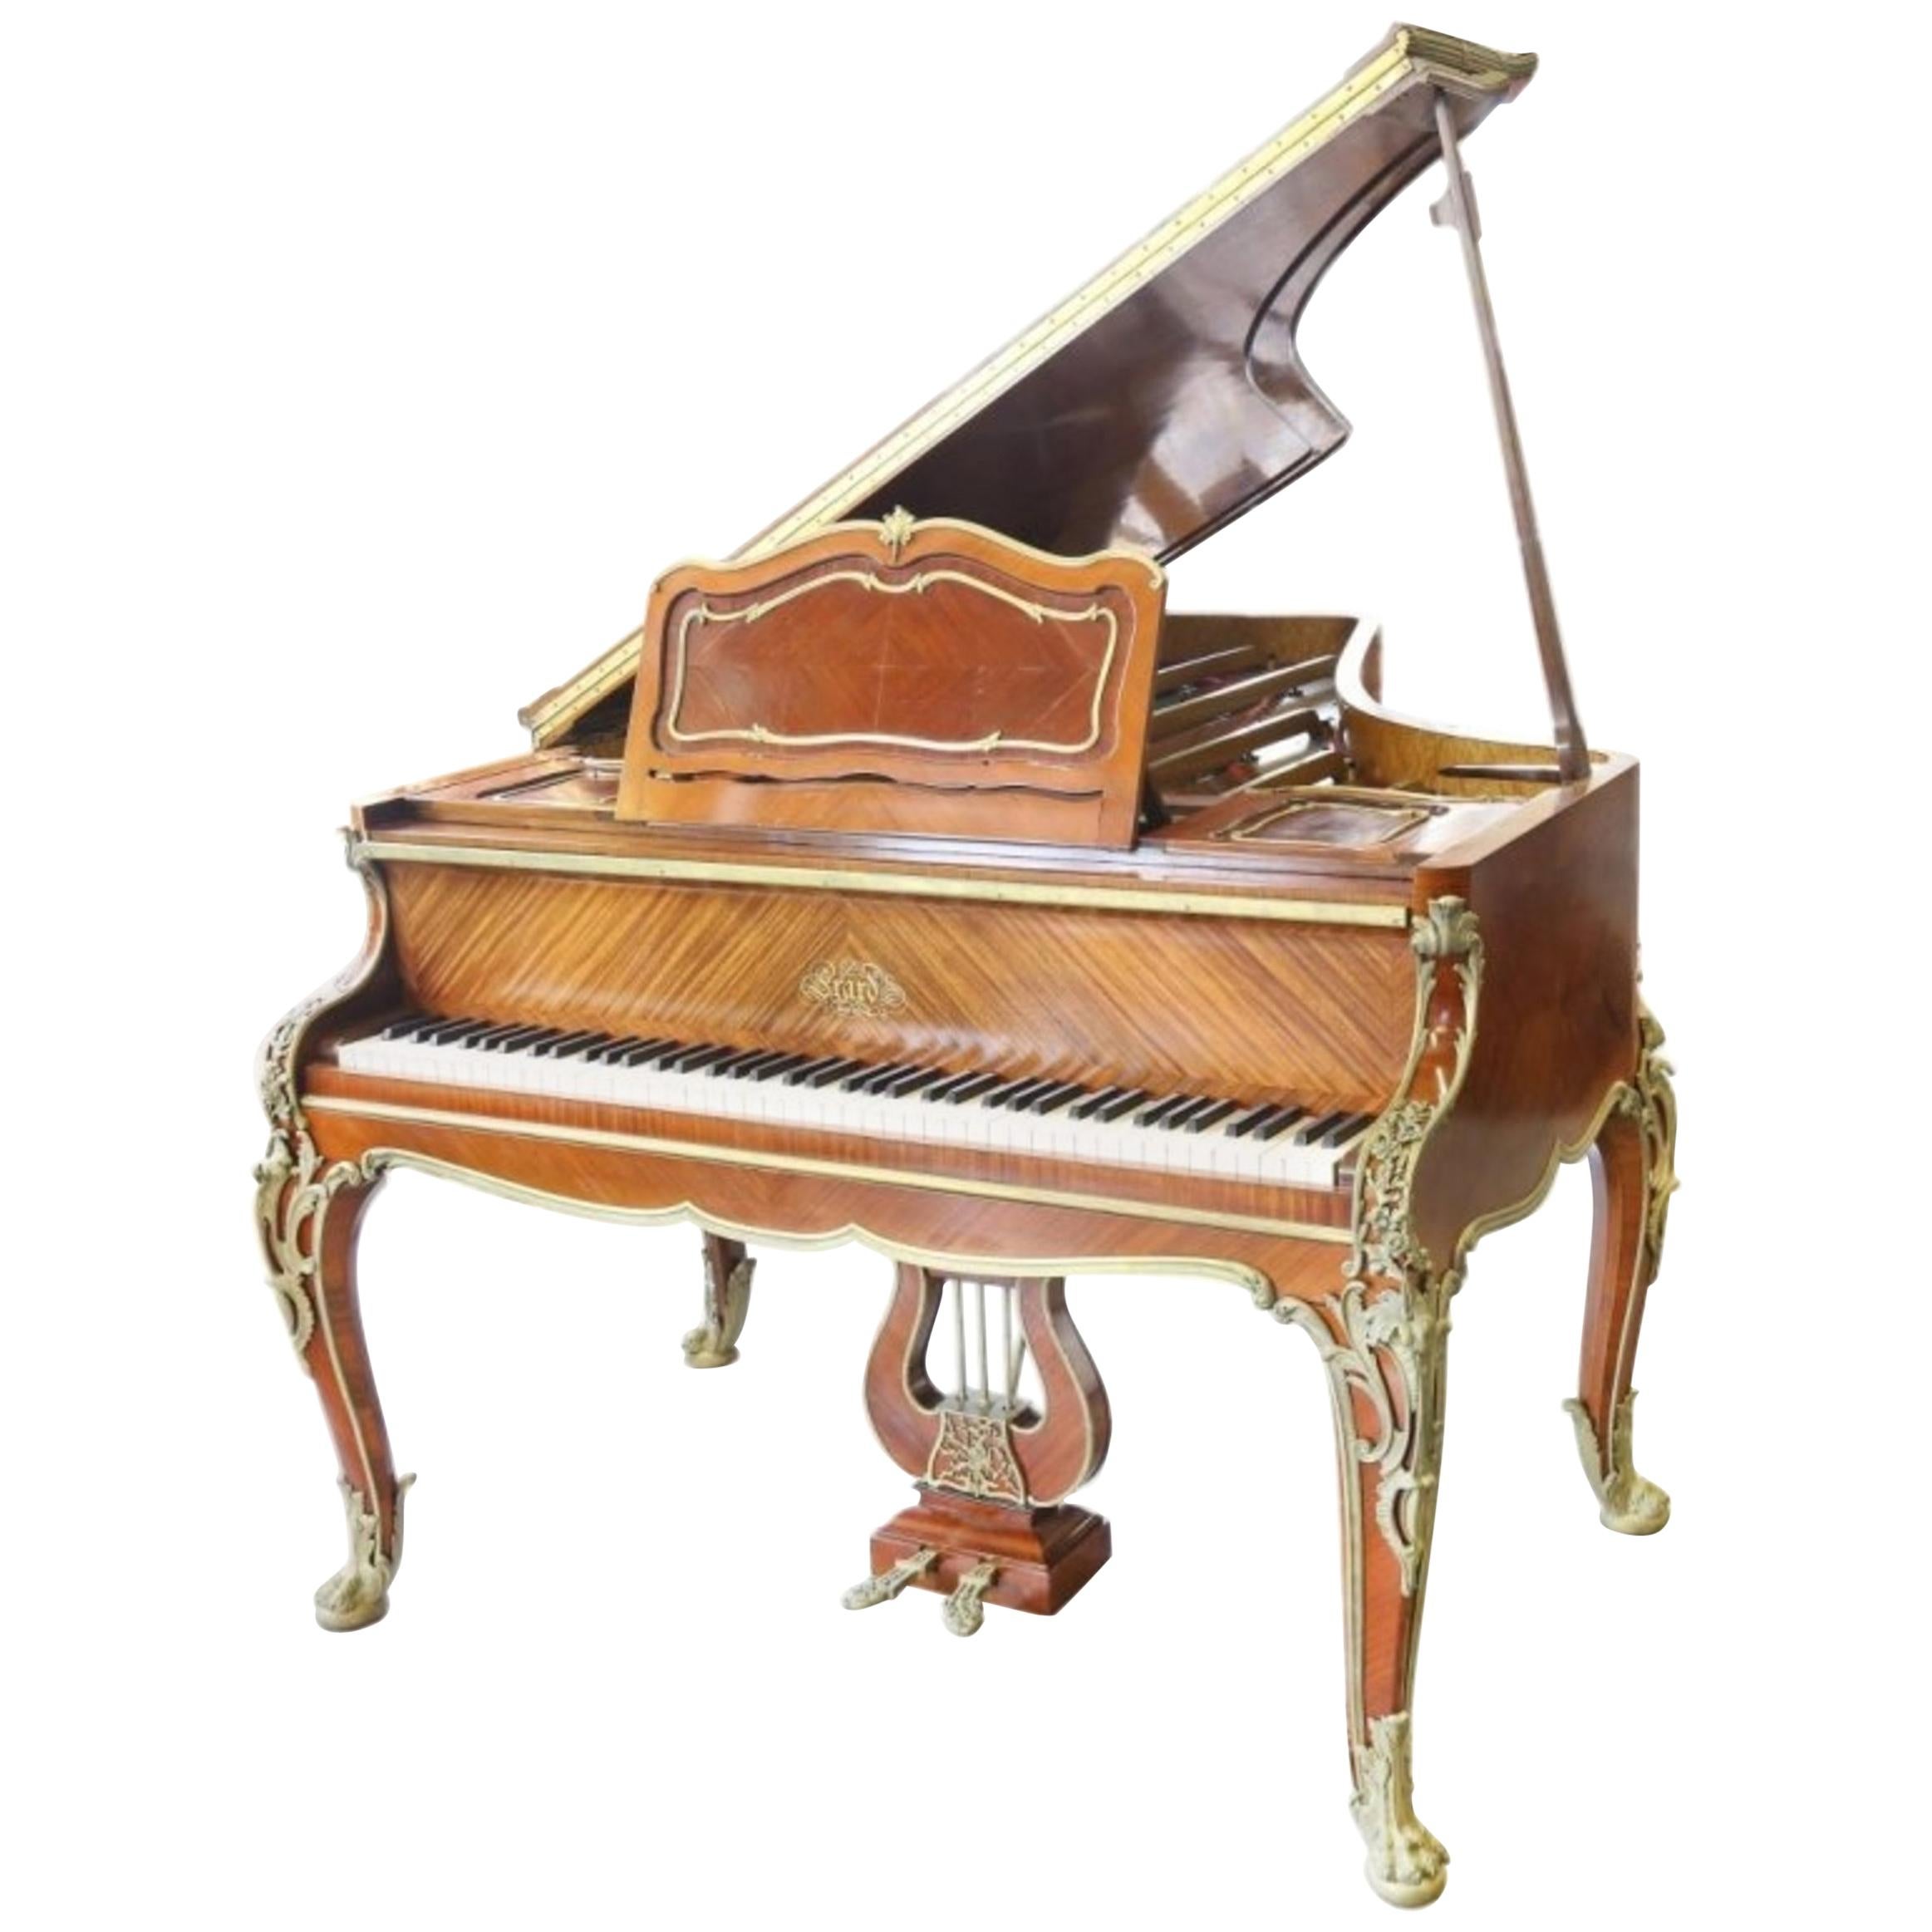 Very Fine Louis XV Style Piano by Francois Linke, Signed., Stamped by Zwiener